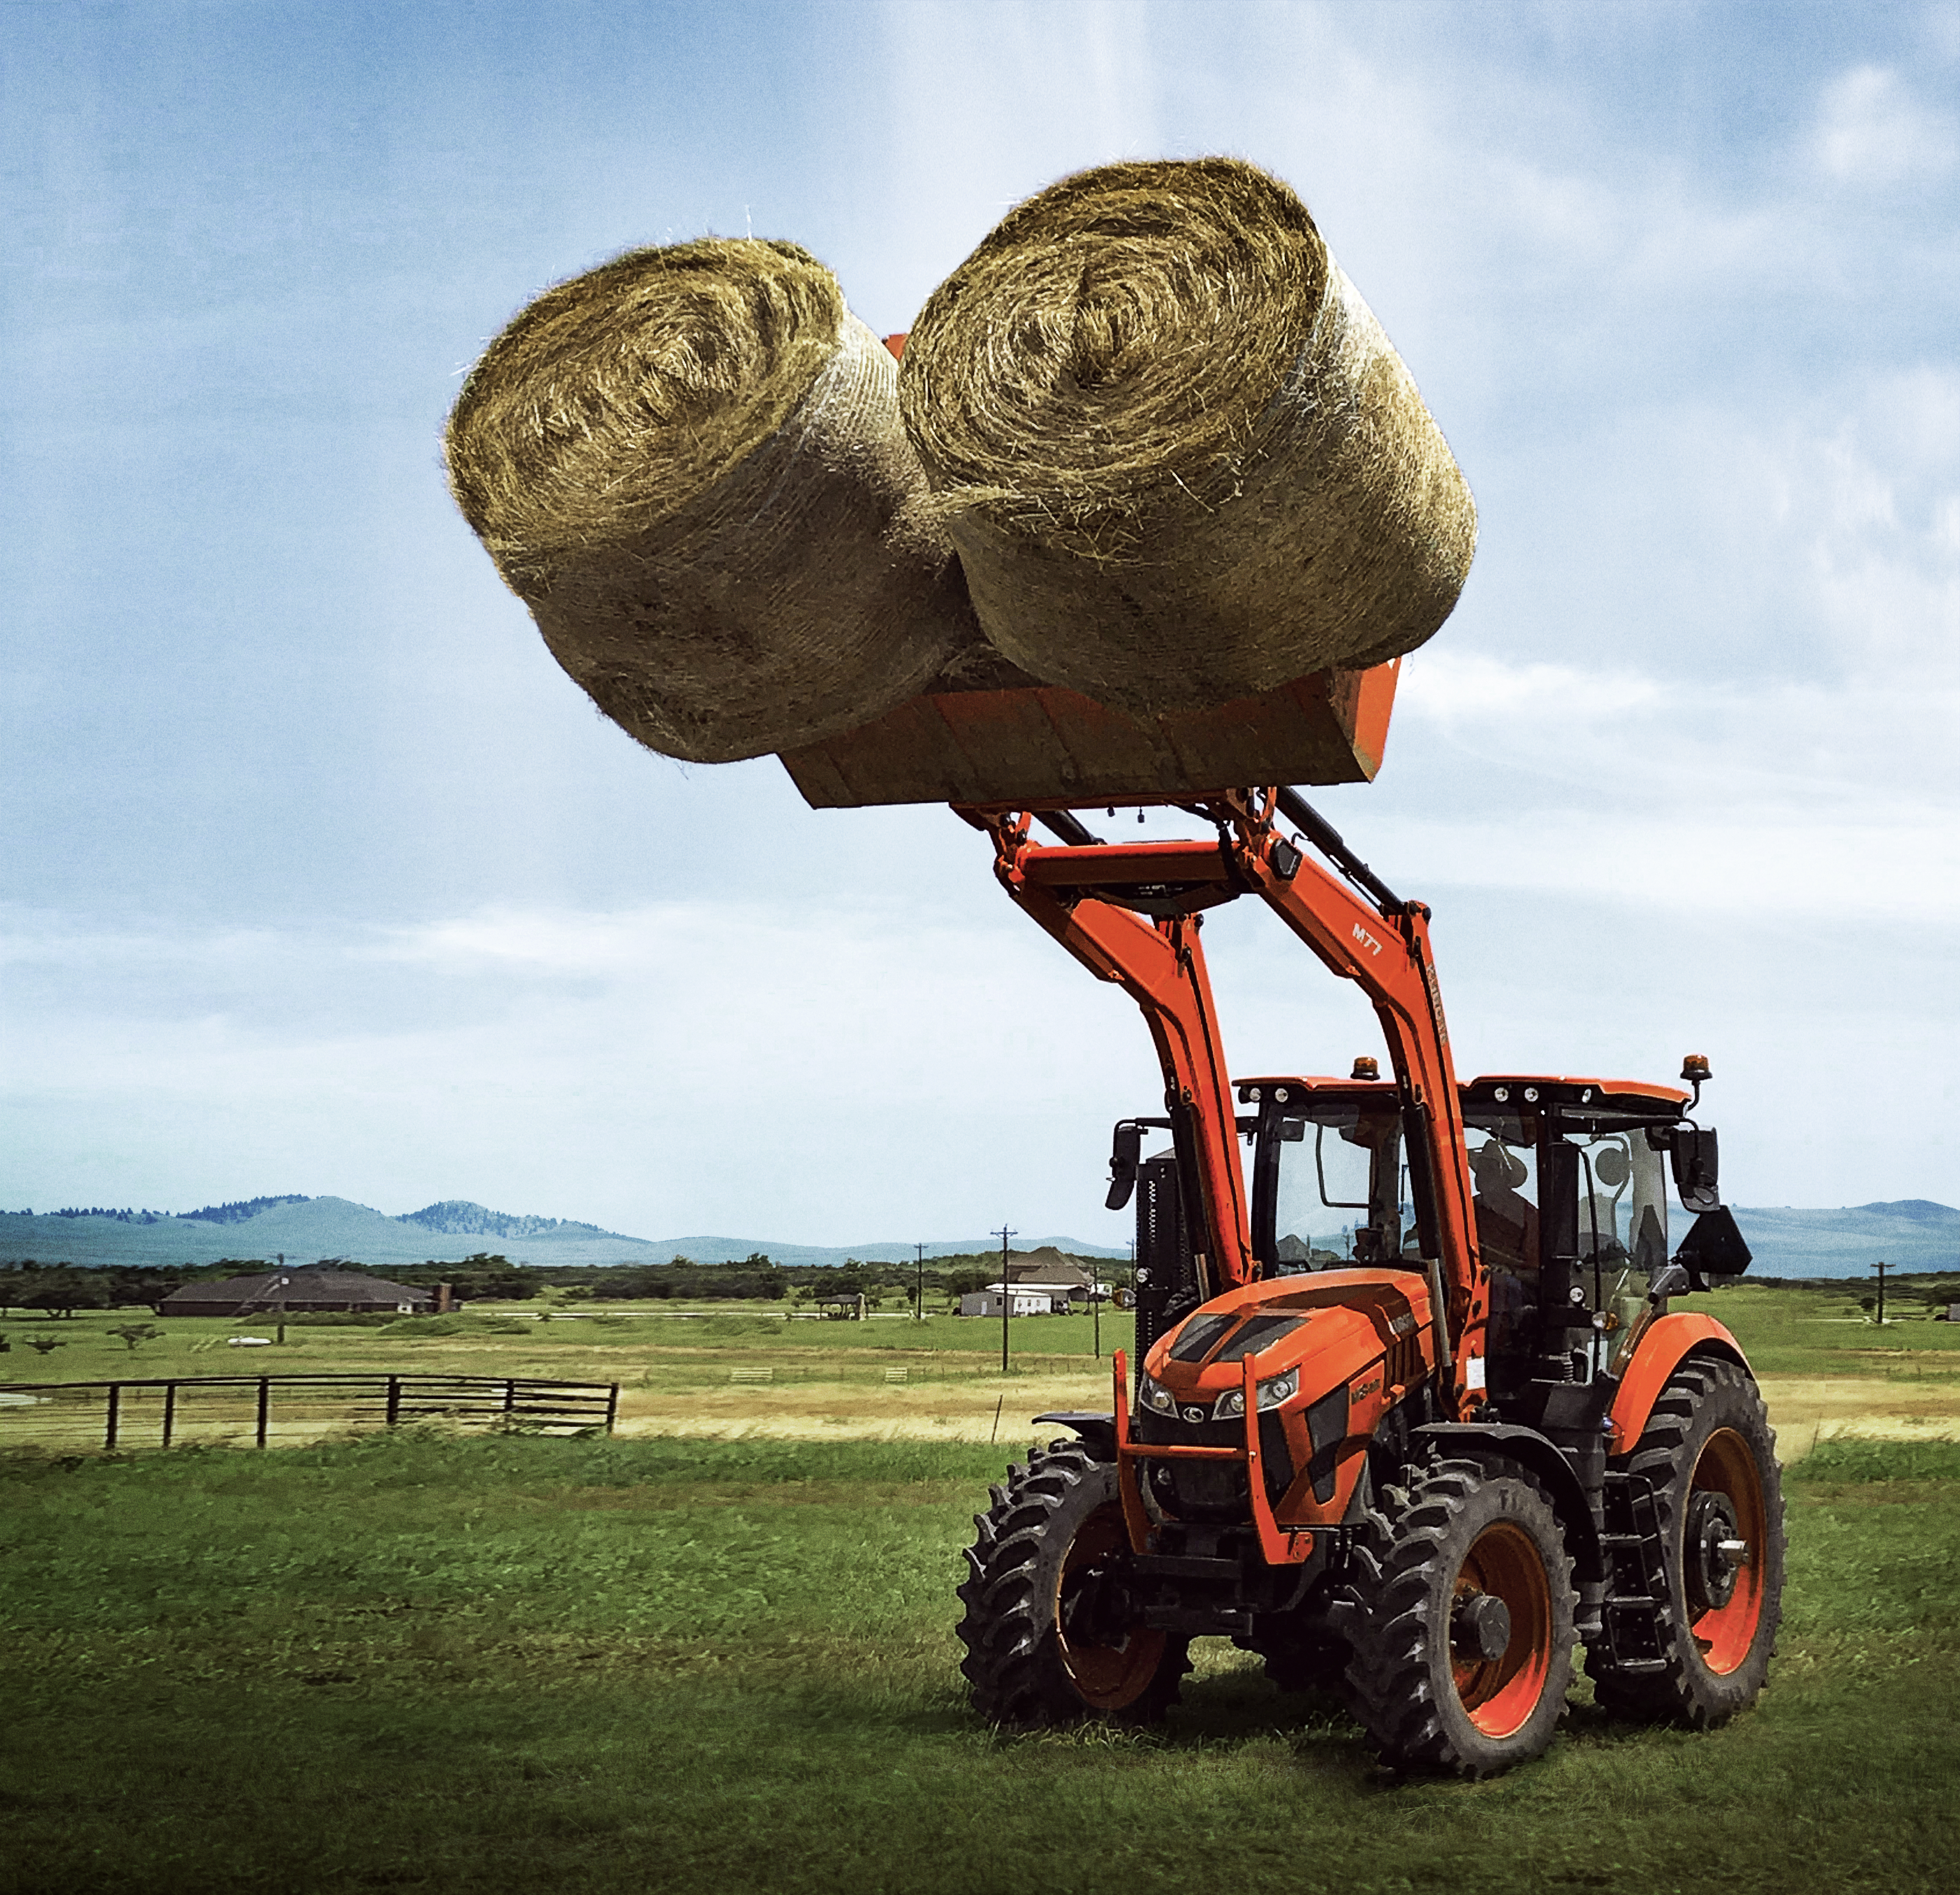 Cummins steps in to provide power and reliability for Kubota's biggest  tractor ever | Cummins Inc.